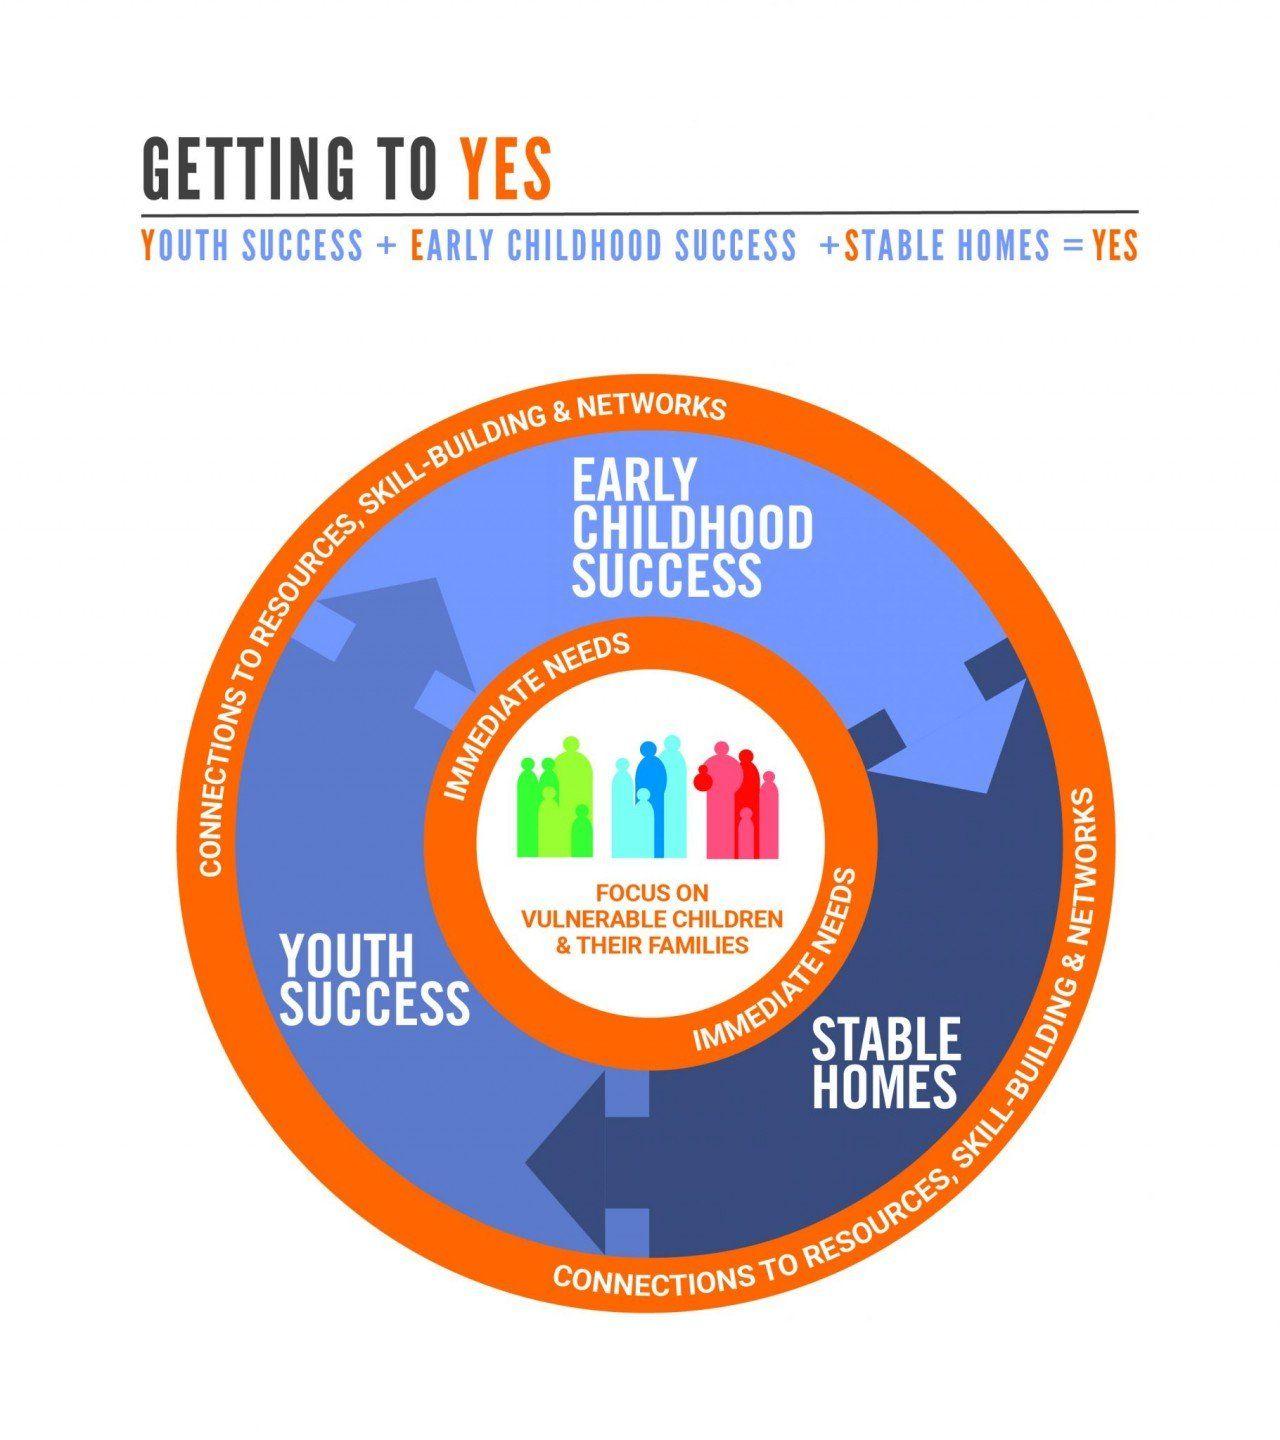 Yes Circle Logo - getting-to-yes-circle - United Way of the Greater Triangle